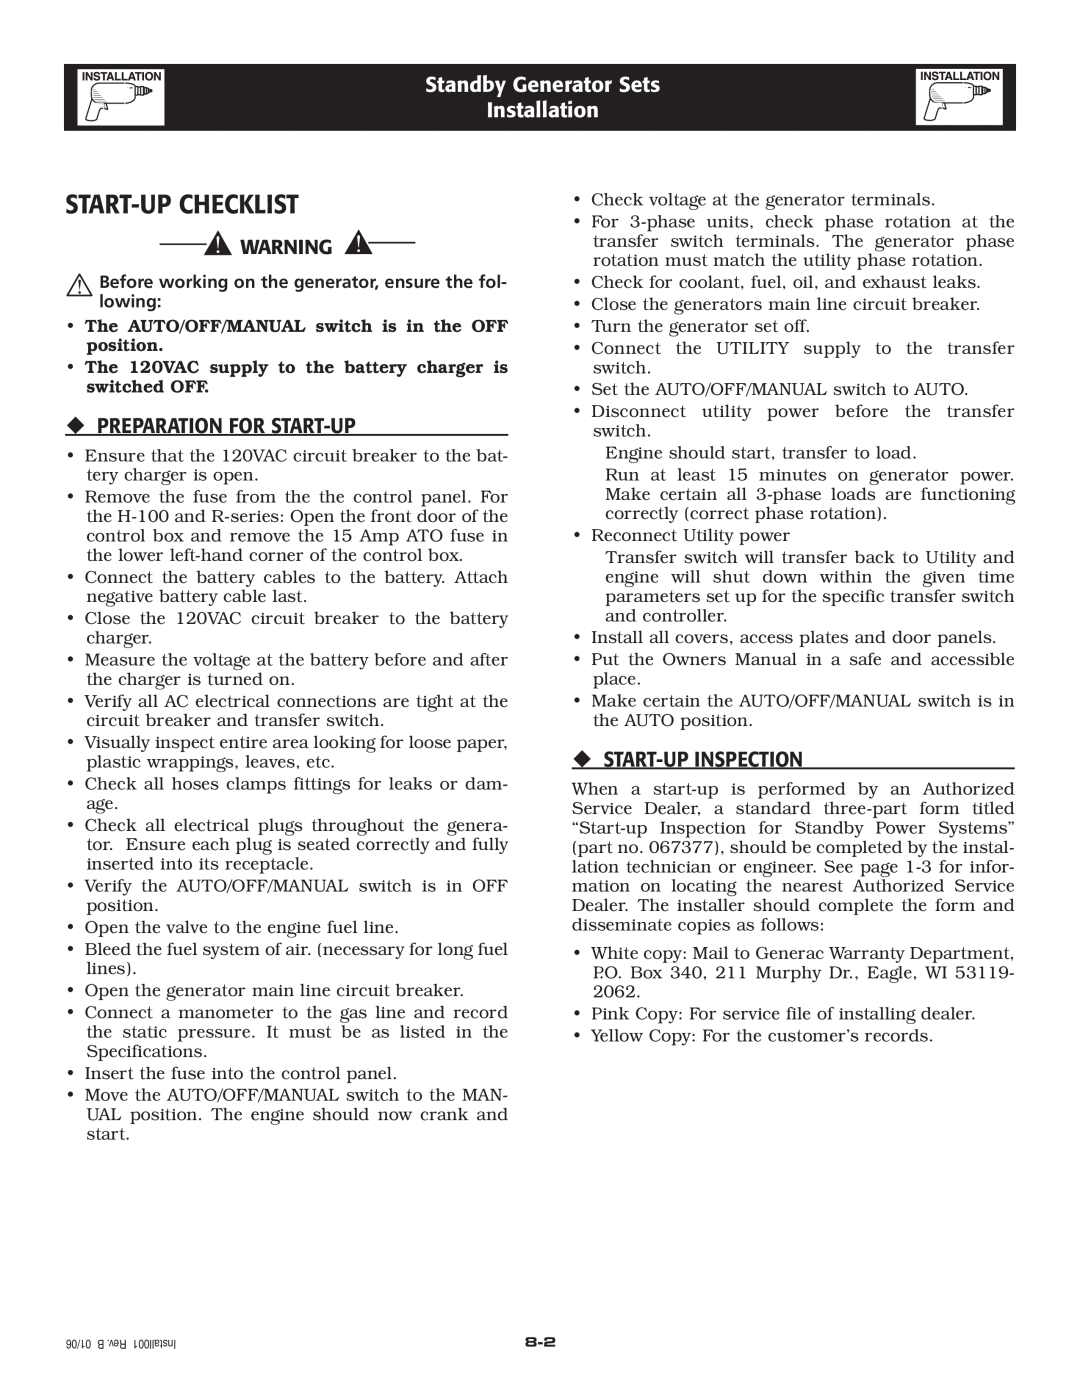 Generac Power Systems 005261-1, 005262-1 owner manual Start-Up Checklist, ‹ Preparation For Start-Up, ‹ Start-Up Inspection 